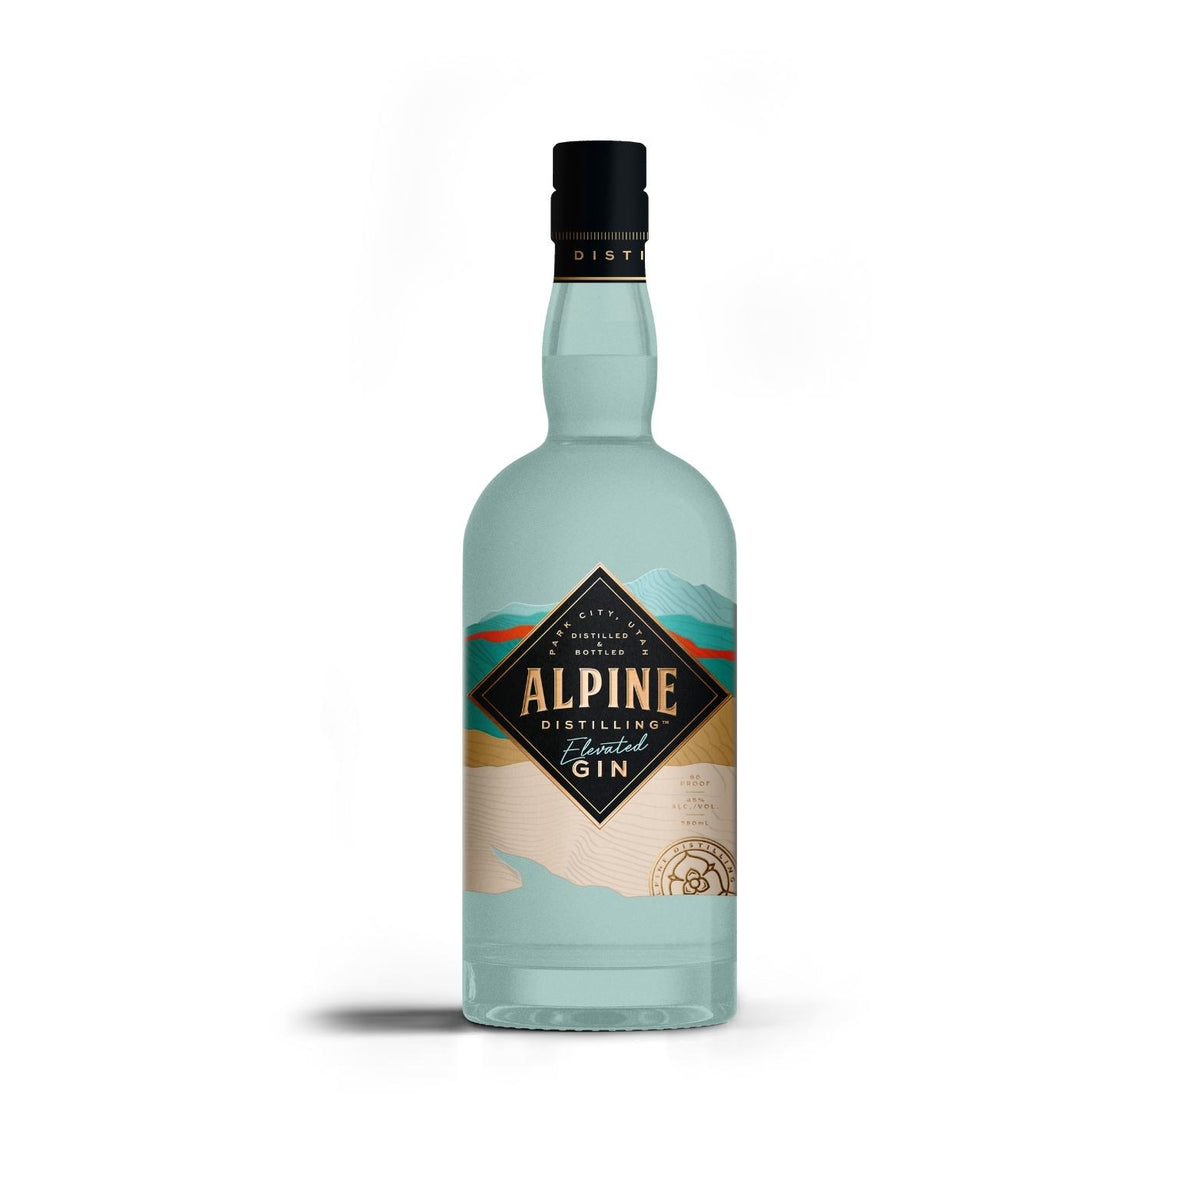 — Alpine Elevated Gin - Distilling TIPXY